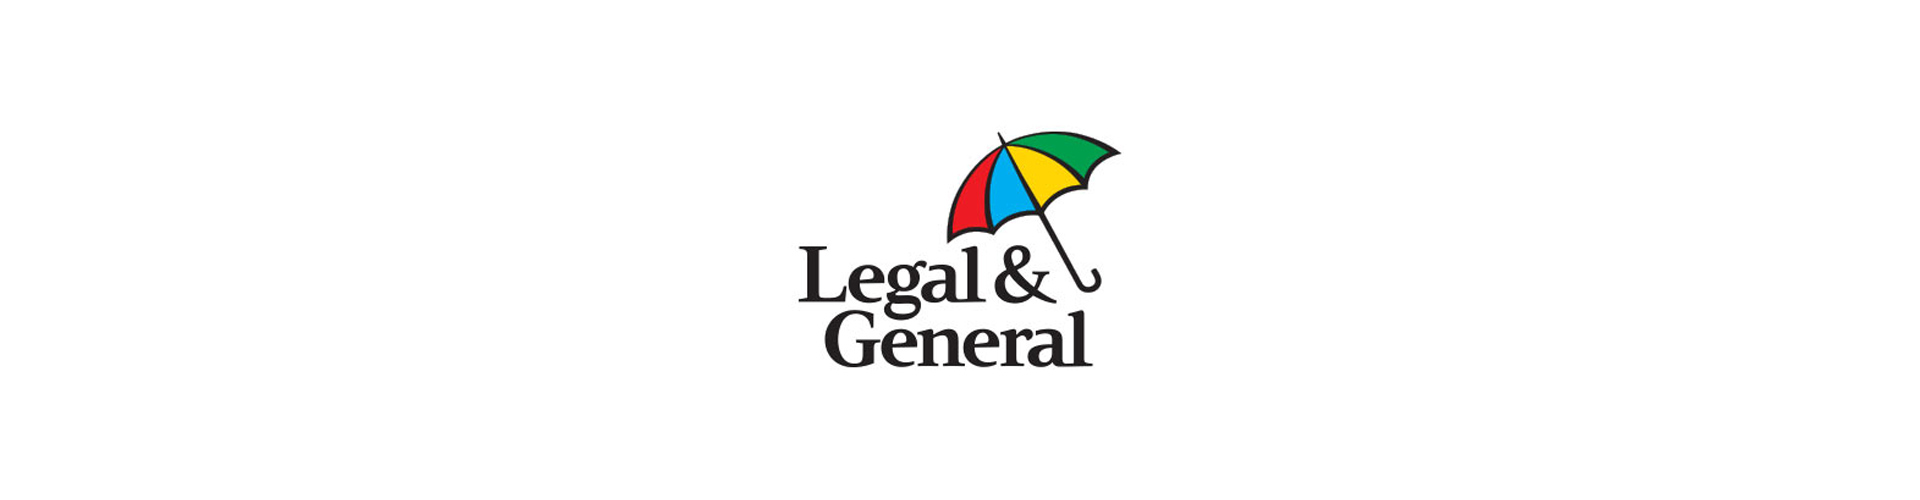 Legal & General appoints Hood Group to launch its new travel insurance product